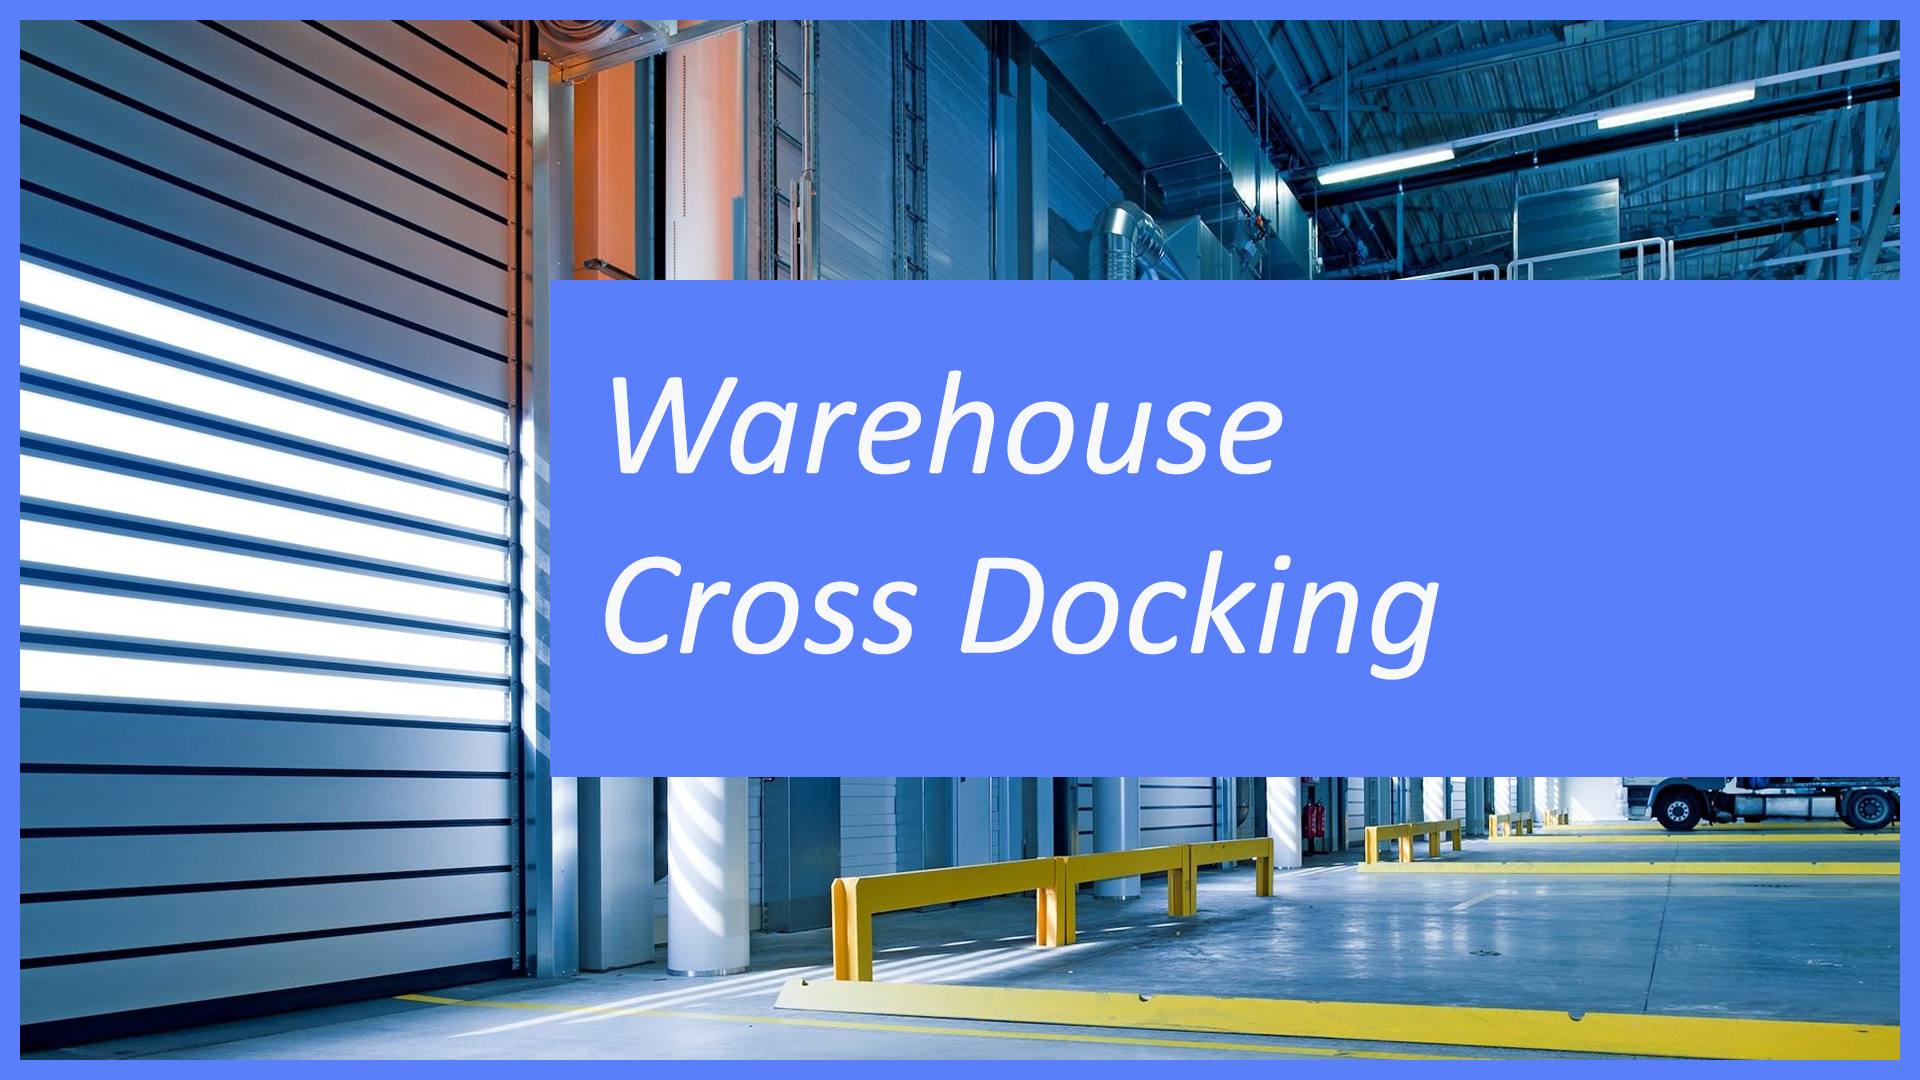 You are currently viewing Cross Docking using Advanced Warehouse in Dynamics 365 Finance and Operations